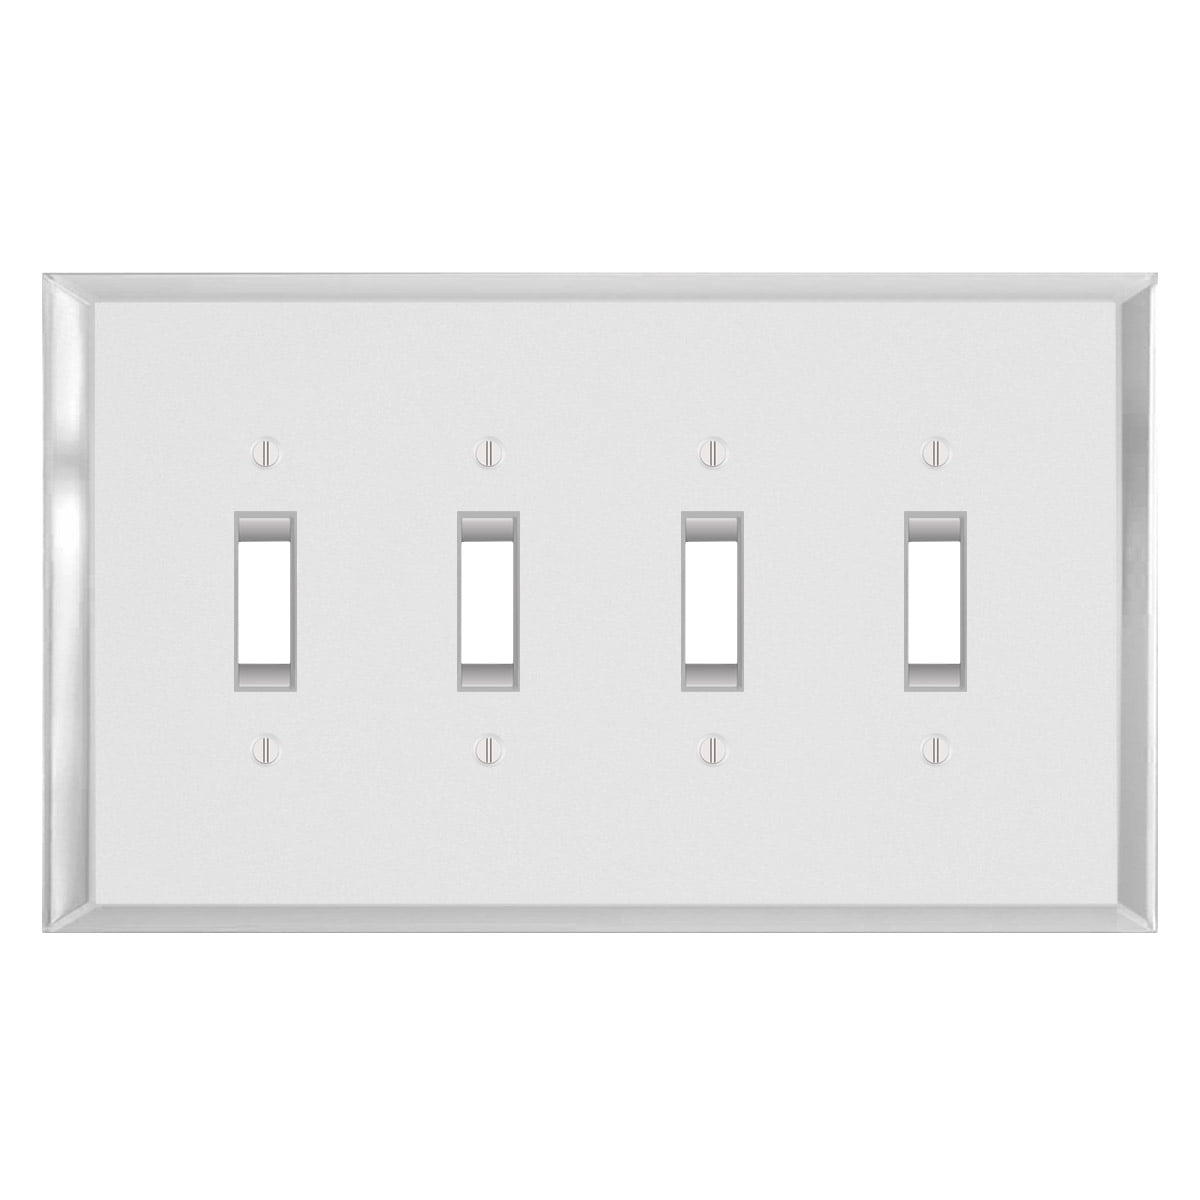 Soccer Decorative Double Toggle Light Switch Wall Plate Cover Standard/Midway or Jumbo Size